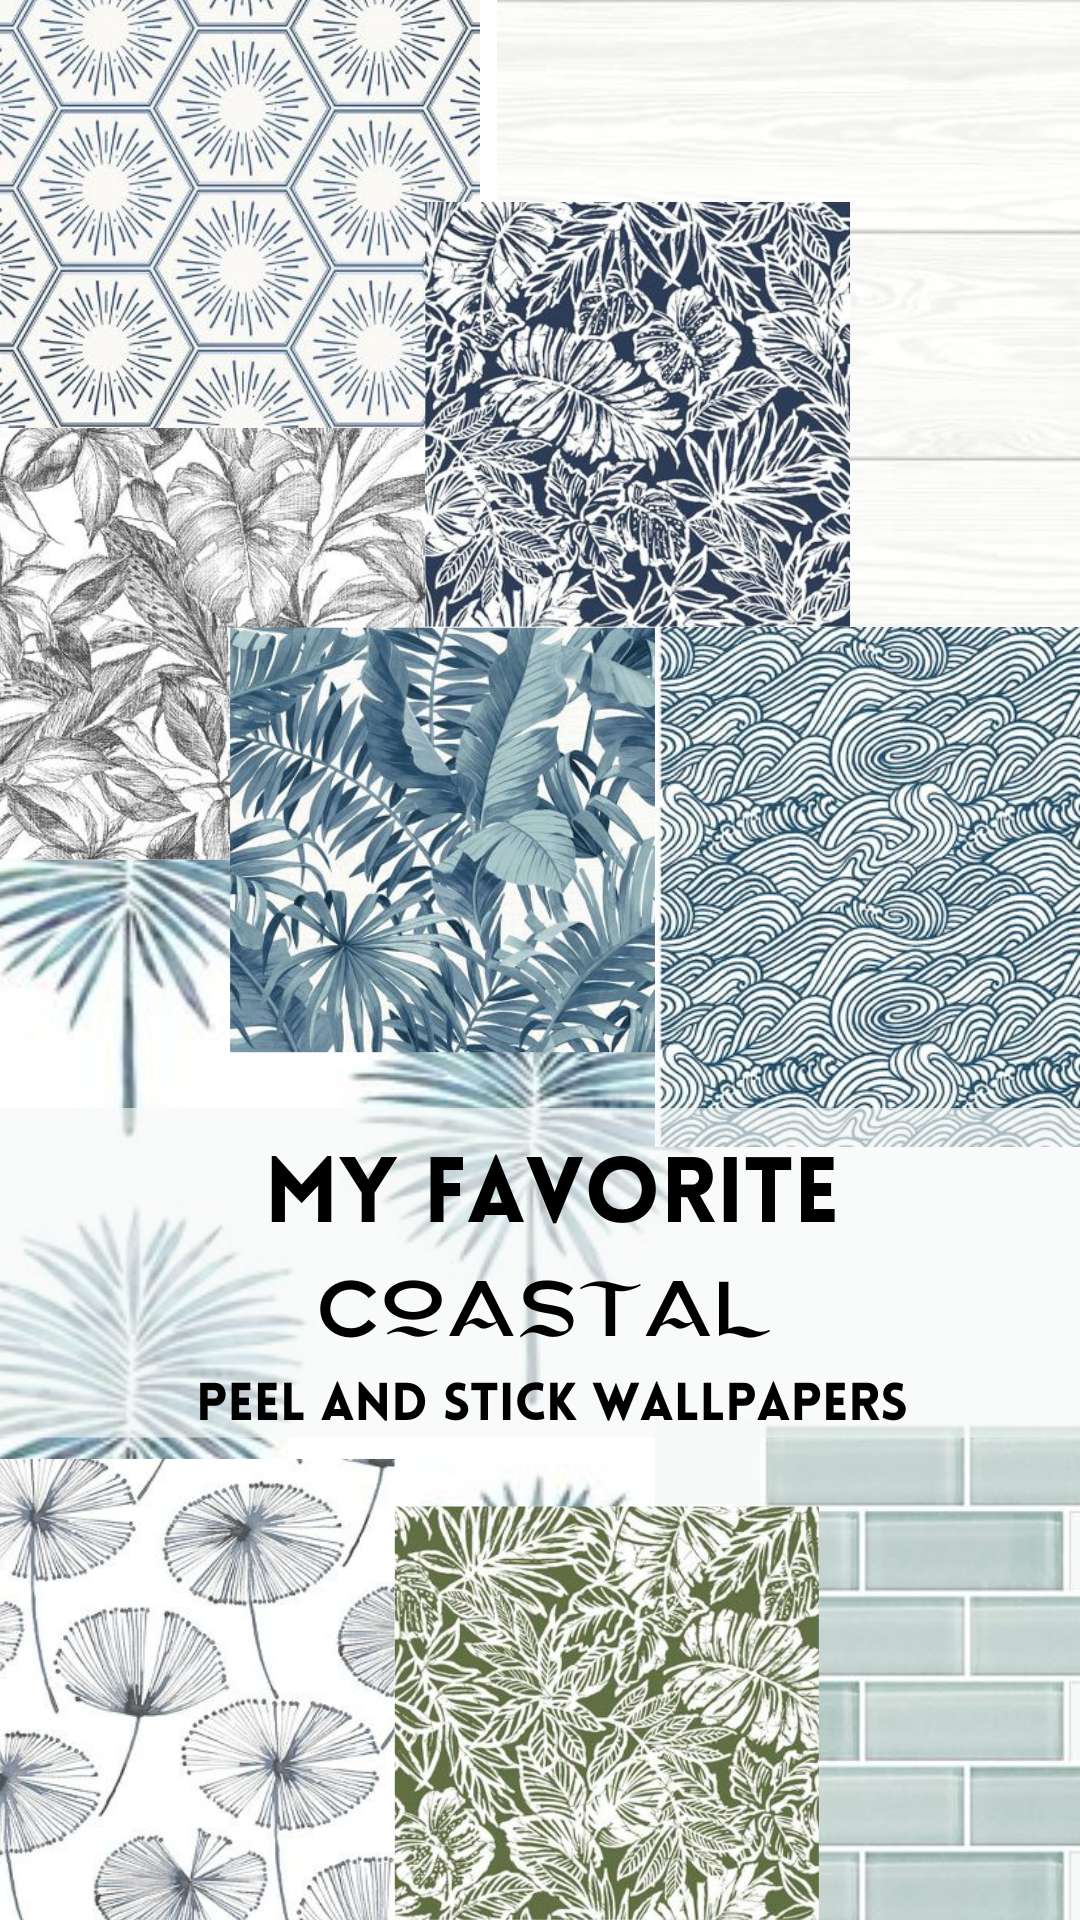 My Favorite Coastal Peel and Stick Wallpapers